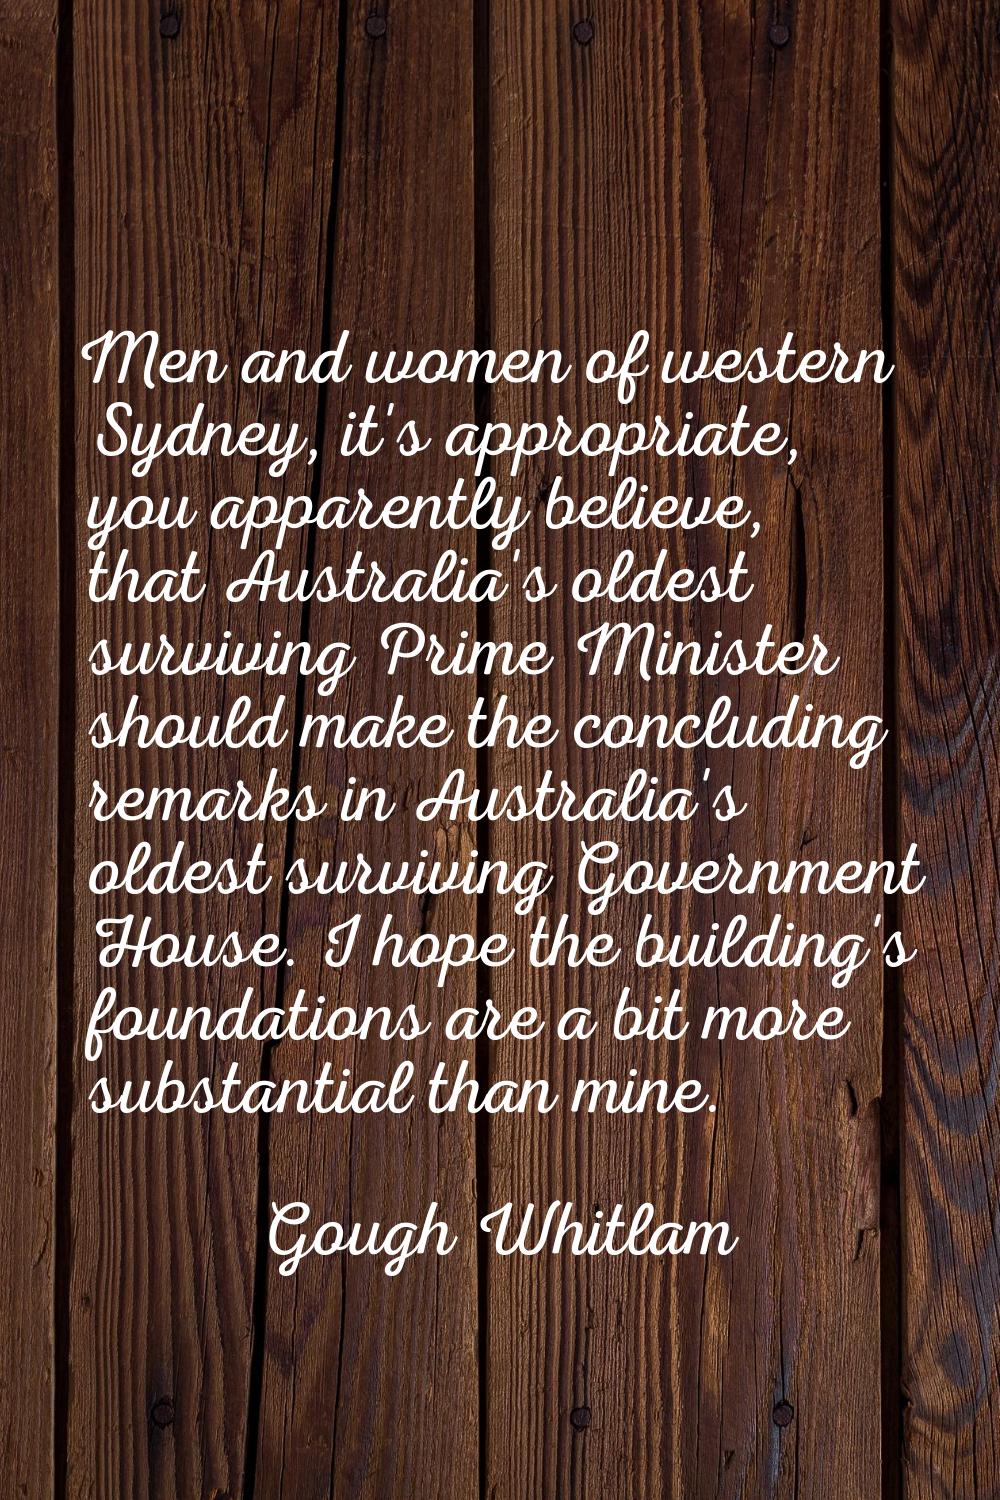 Men and women of western Sydney, it's appropriate, you apparently believe, that Australia's oldest 